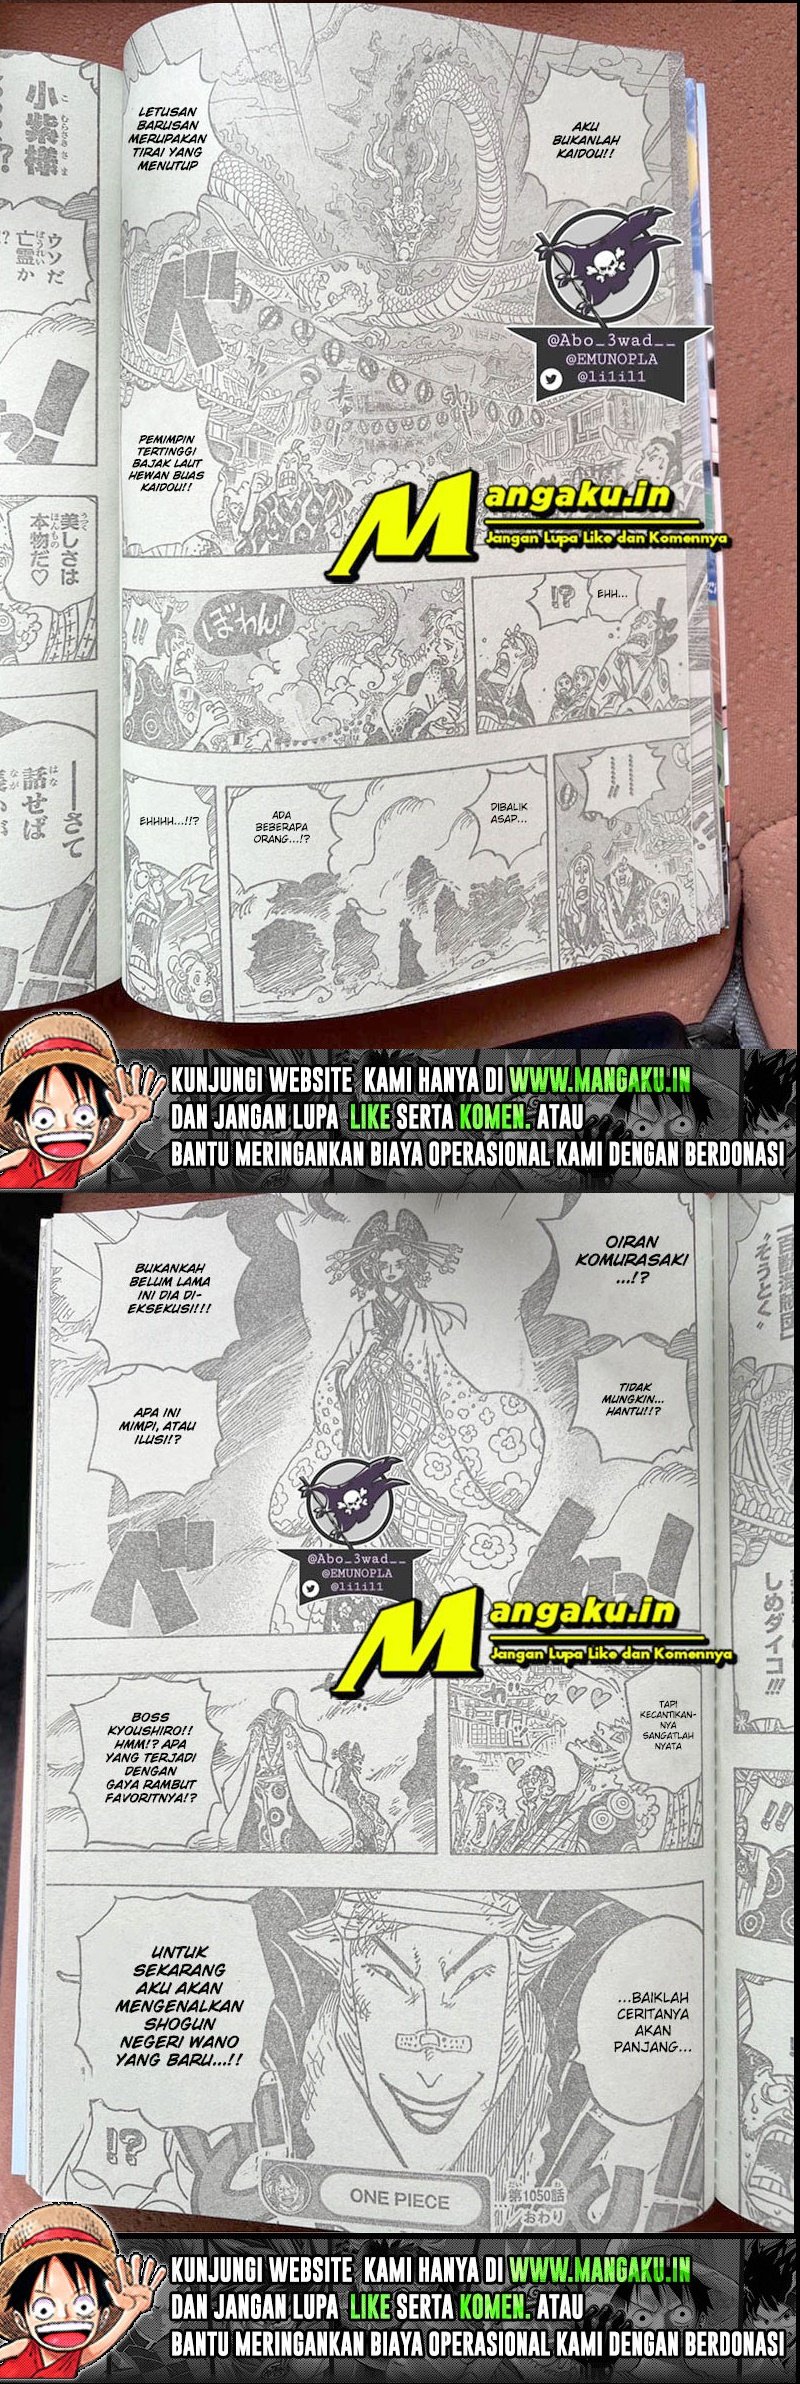 One Piece Chapter 1050 lq